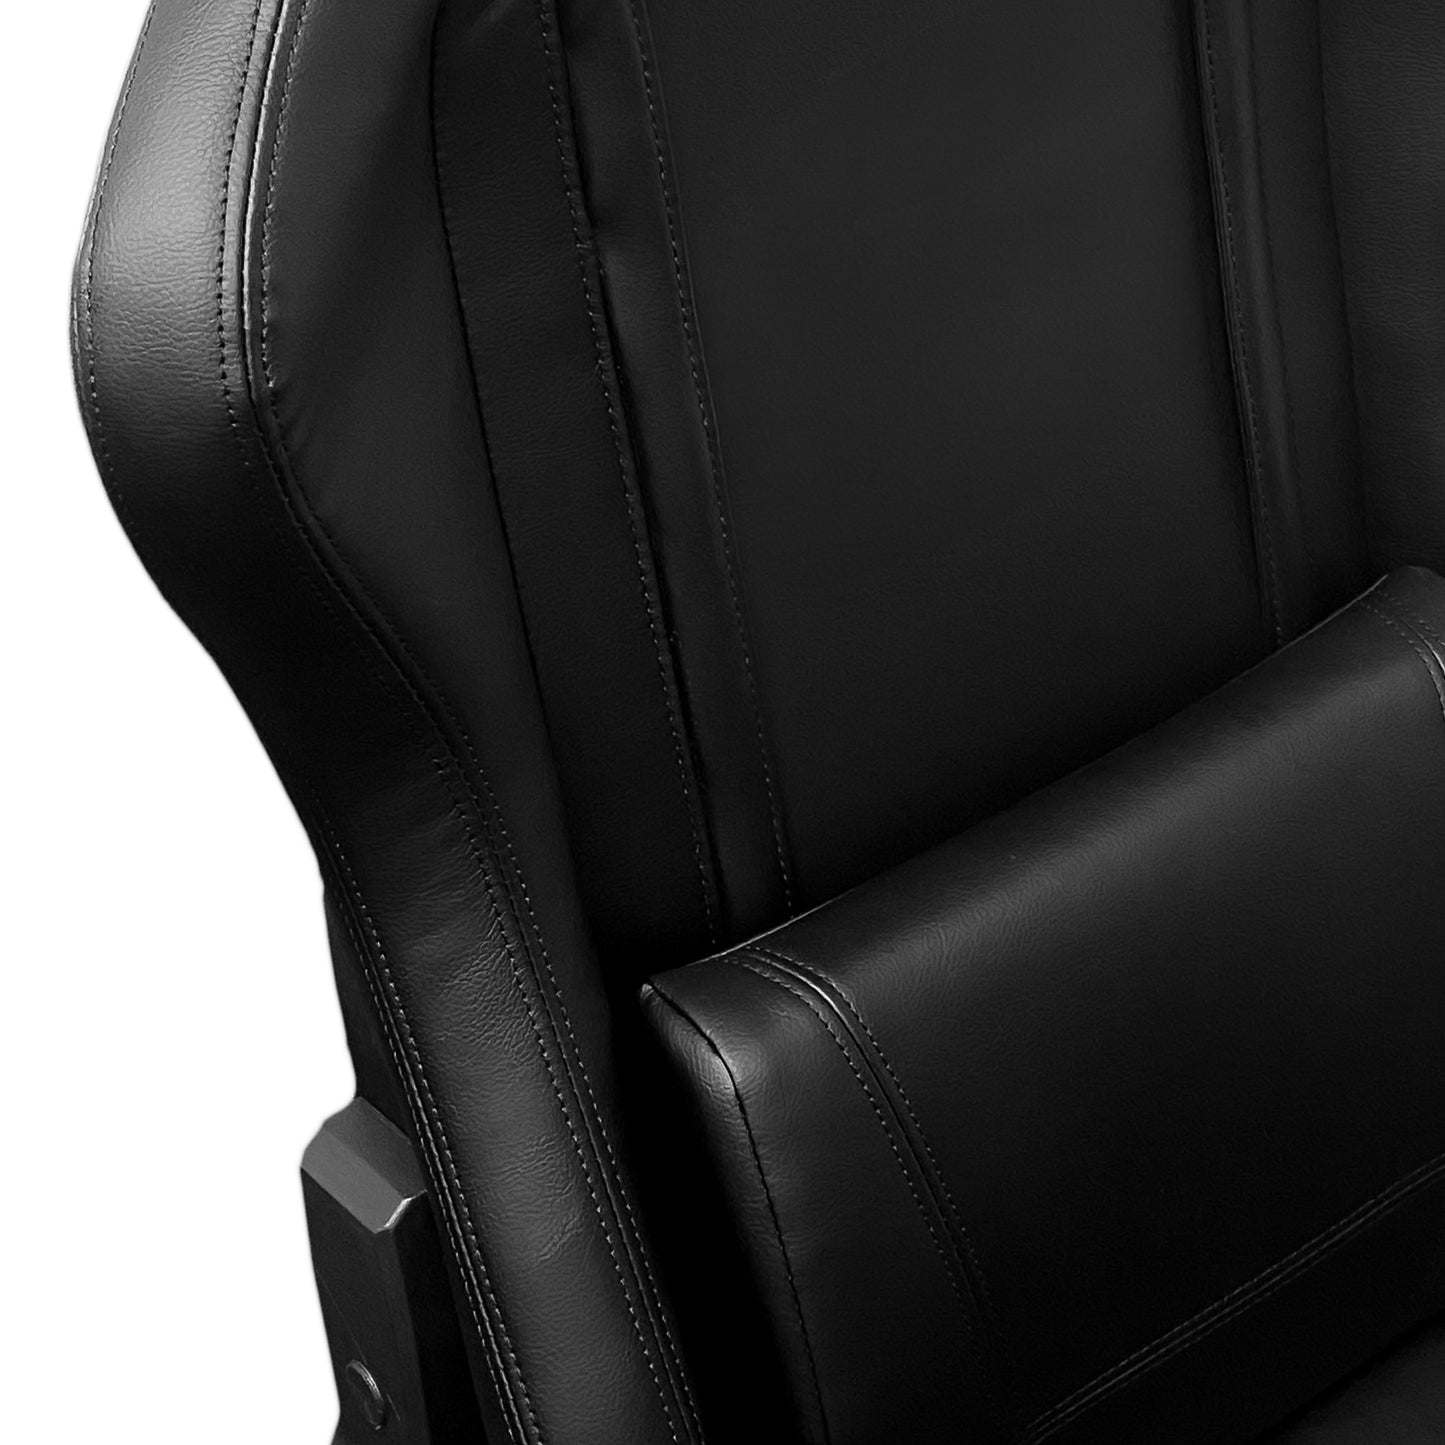 Xpression Pro Gaming Chair with Austin FC Logo